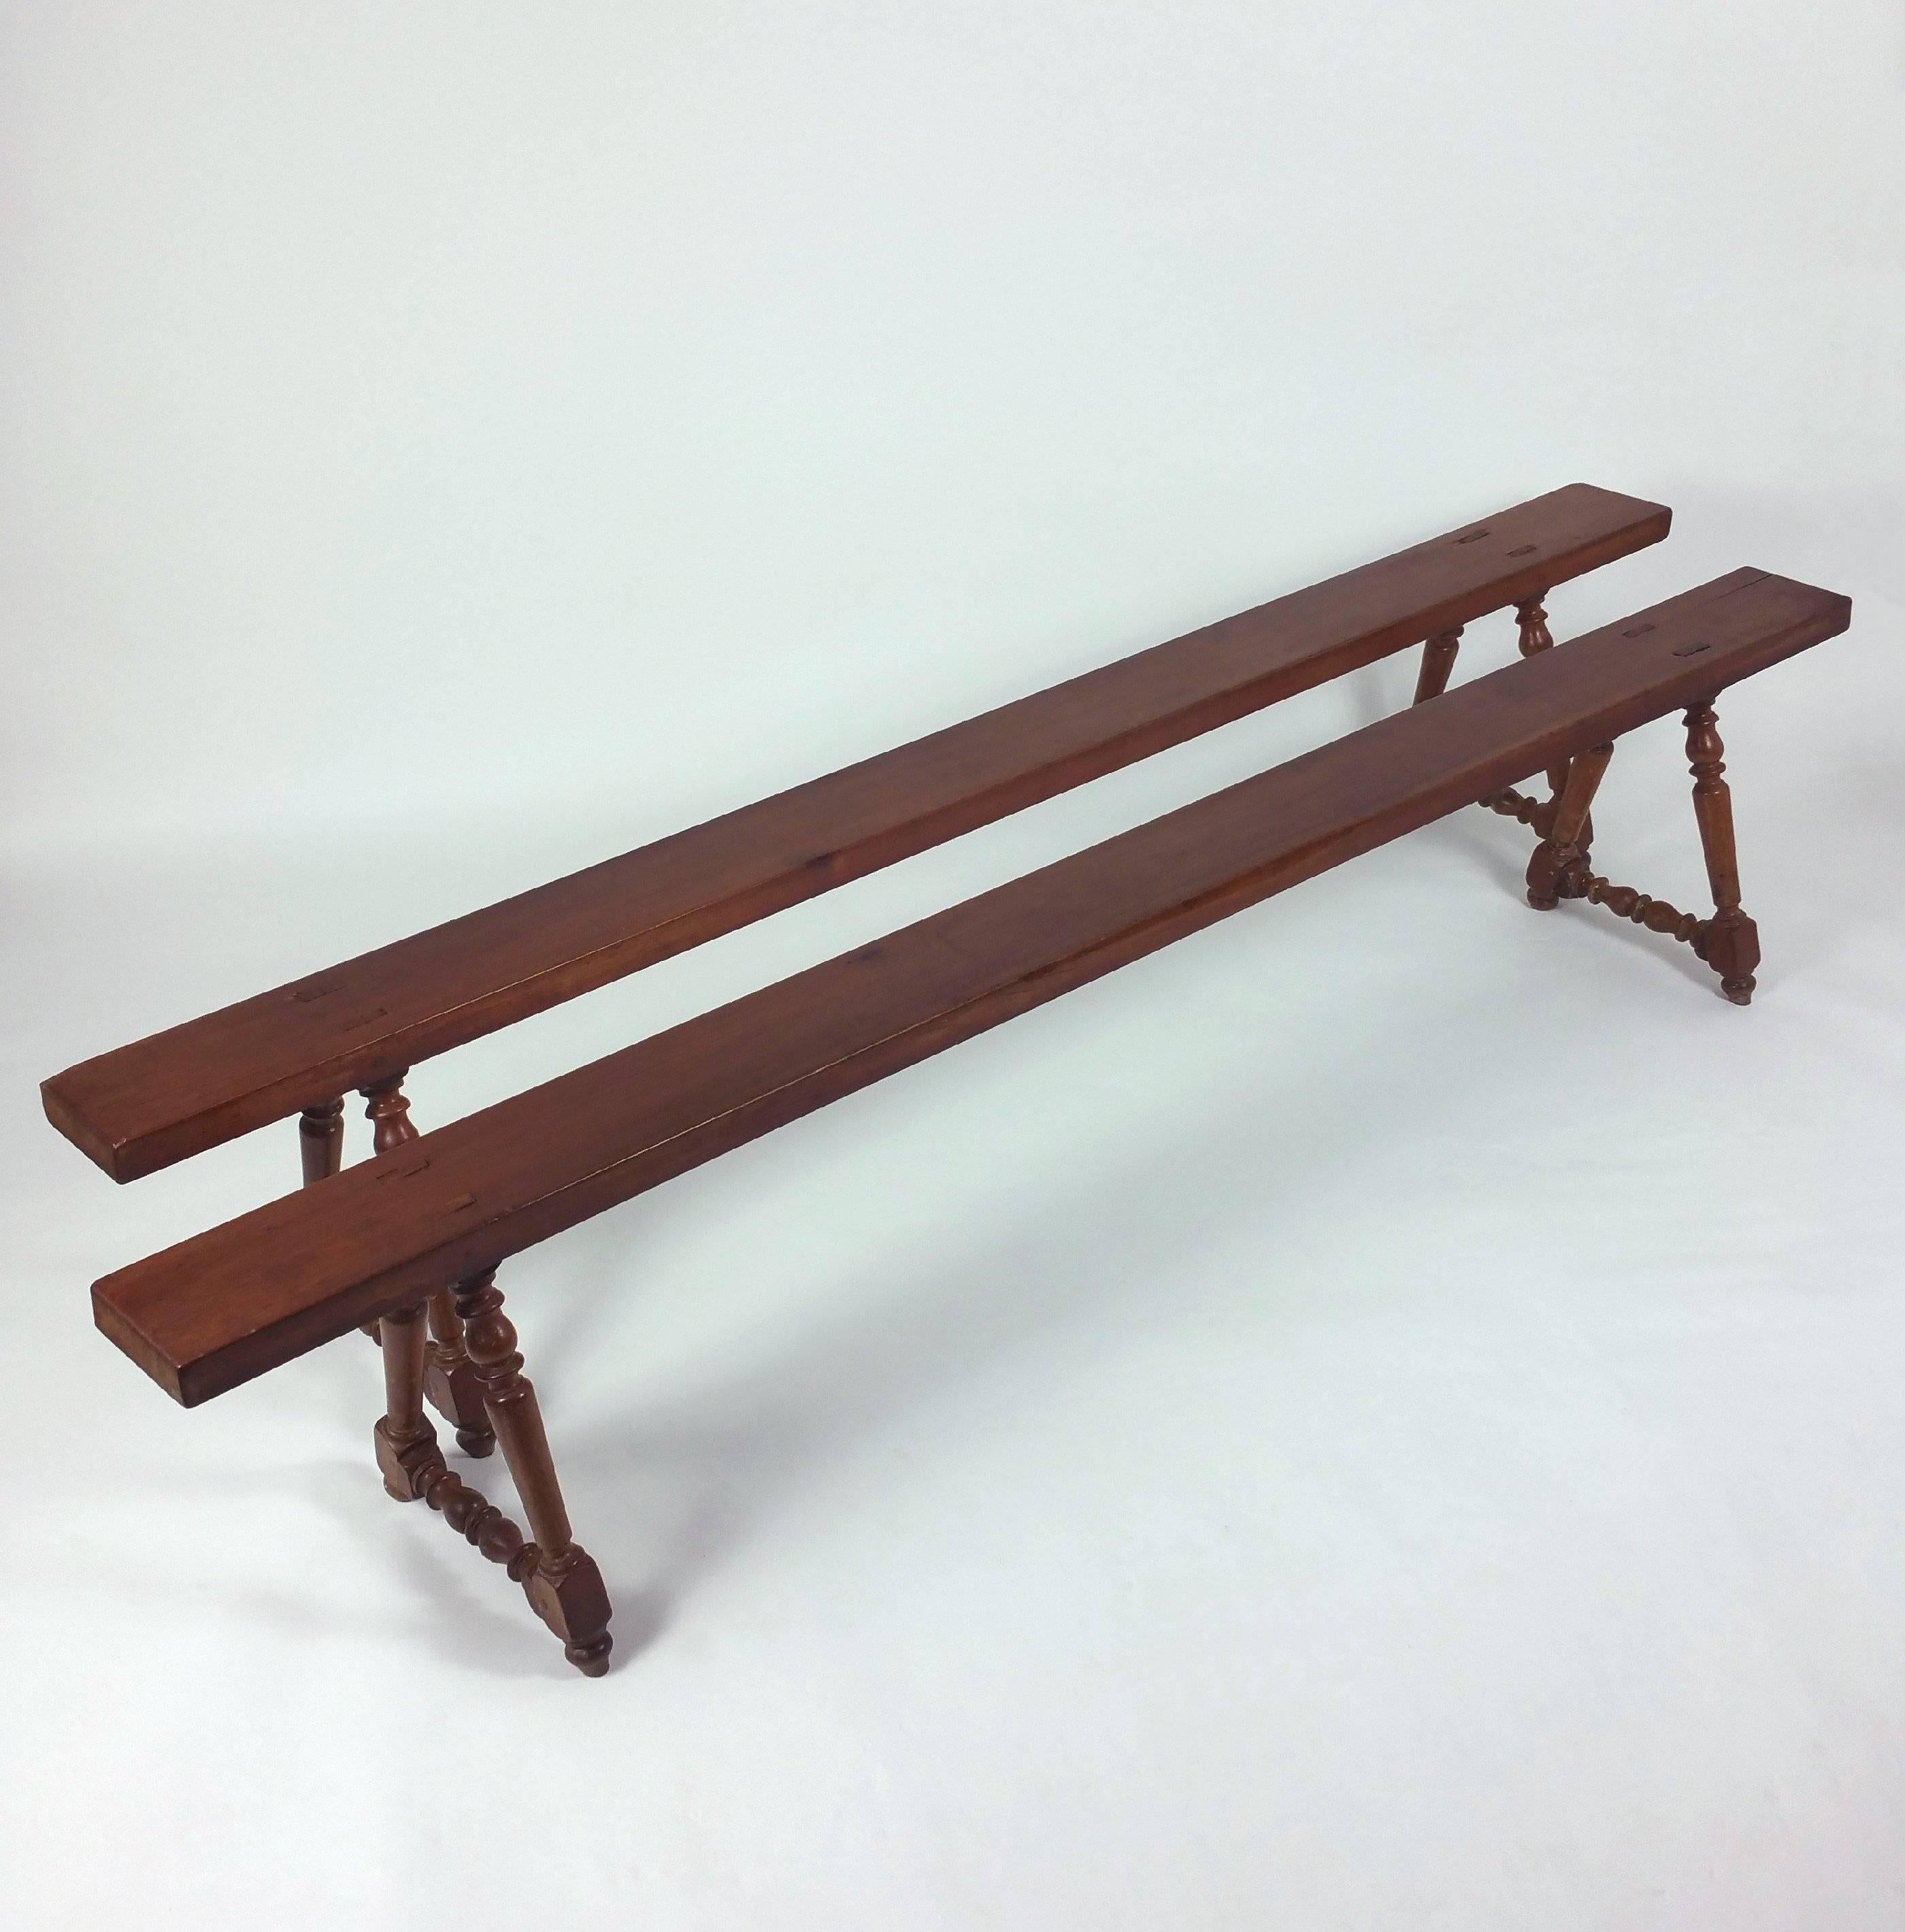 This gorgeous pair of 19th century French cherrywood benches on turned supports features a warm and rich patina in a simple but universal style. Each bench measures 6 ¼ in – 15.9 cm wide, 17 ½ in – 44.5 cm high and 90 ½ in – 230 cm in total length.